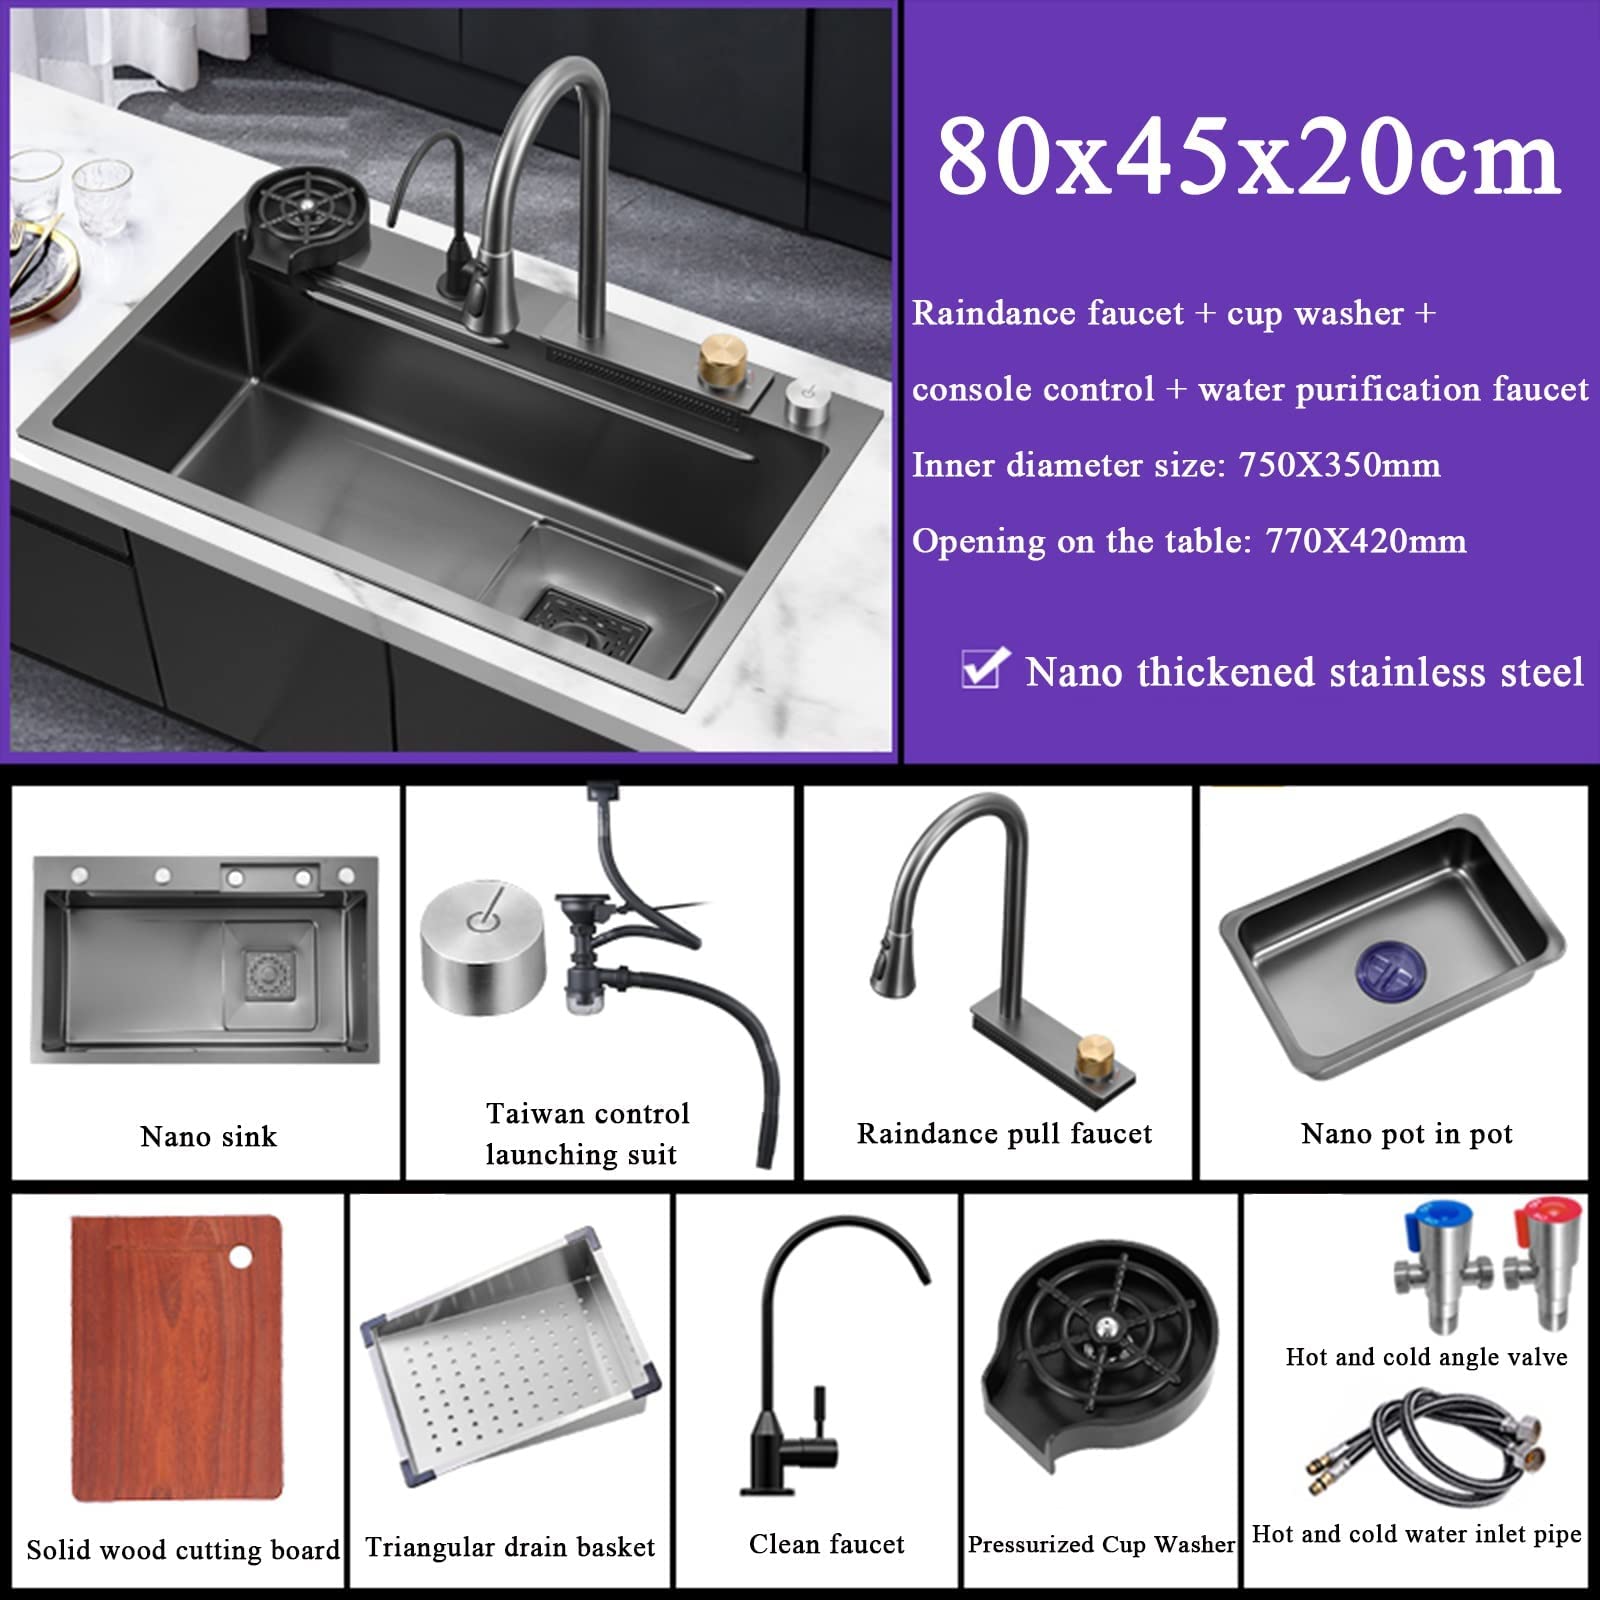 Kitchen Sink 304 Stainless Steel Nano Raindance Waterfall Home Vegetable Basin Single Sink Workstation With Pull-Out Faucet, Pressurized Cup Washer1